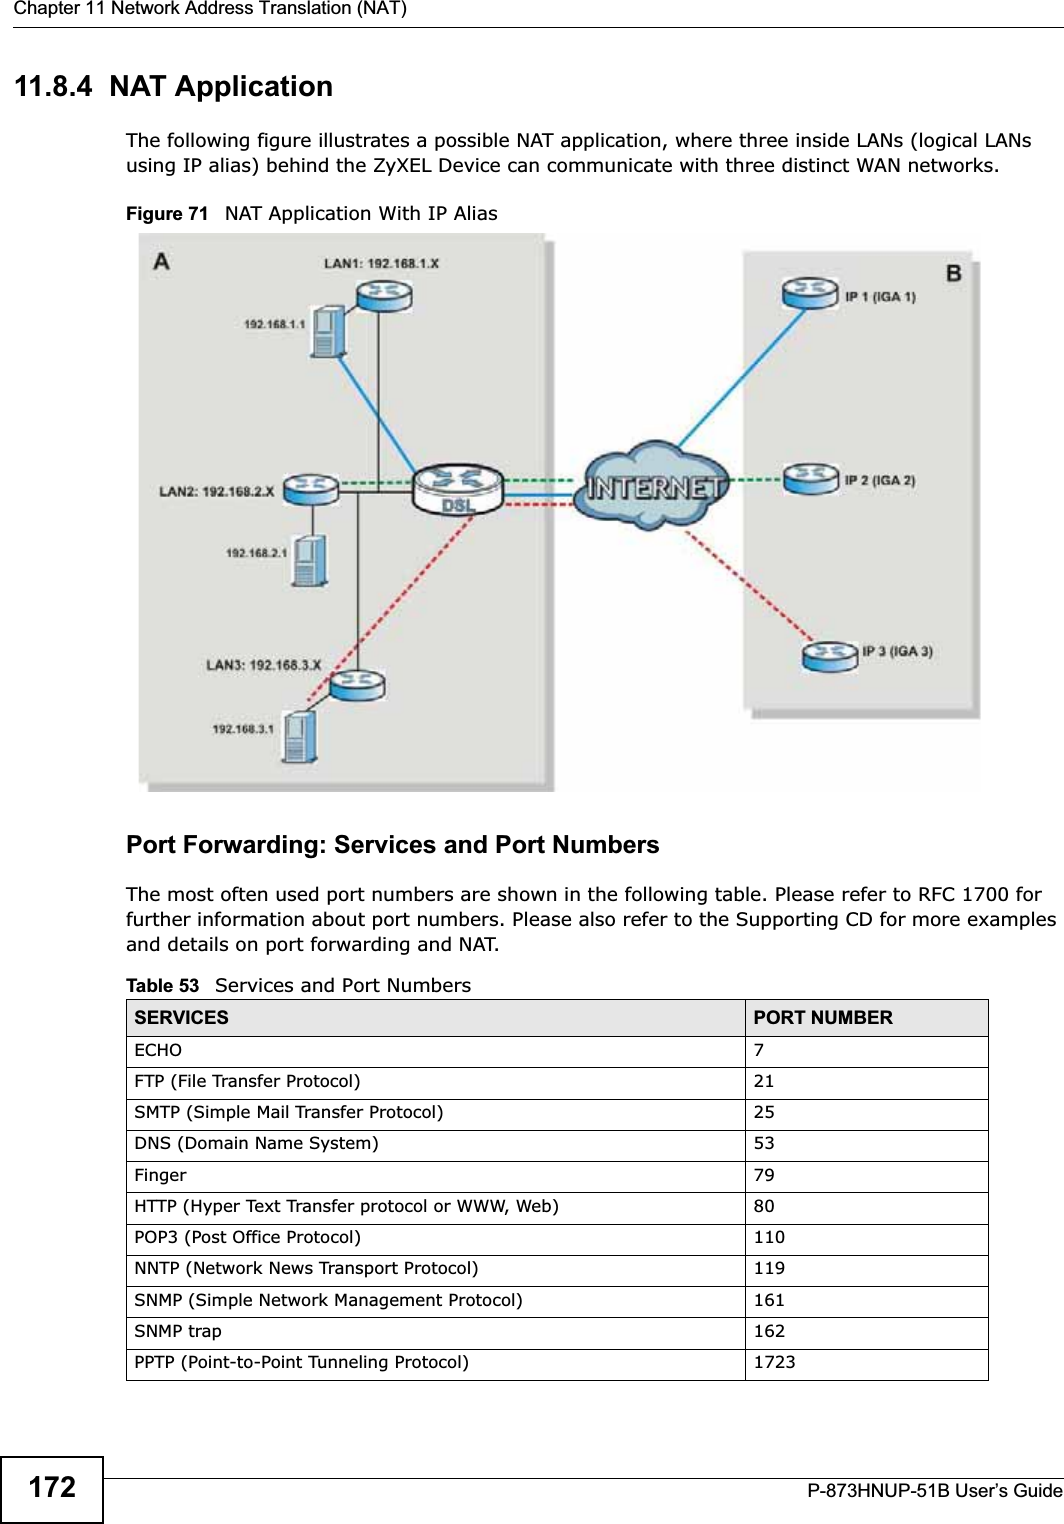 Chapter 11 Network Address Translation (NAT)P-873HNUP-51B User’s Guide17211.8.4  NAT ApplicationThe following figure illustrates a possible NAT application, where three inside LANs (logical LANs using IP alias) behind the ZyXEL Device can communicate with three distinct WAN networks.Figure 71   NAT Application With IP AliasPort Forwarding: Services and Port NumbersThe most often used port numbers are shown in the following table. Please refer to RFC 1700 for further information about port numbers. Please also refer to the Supporting CD for more examples and details on port forwarding and NAT.Table 53   Services and Port NumbersSERVICES PORT NUMBERECHO 7FTP (File Transfer Protocol) 21SMTP (Simple Mail Transfer Protocol) 25DNS (Domain Name System) 53Finger 79HTTP (Hyper Text Transfer protocol or WWW, Web) 80POP3 (Post Office Protocol) 110NNTP (Network News Transport Protocol) 119SNMP (Simple Network Management Protocol) 161SNMP trap 162PPTP (Point-to-Point Tunneling Protocol) 1723